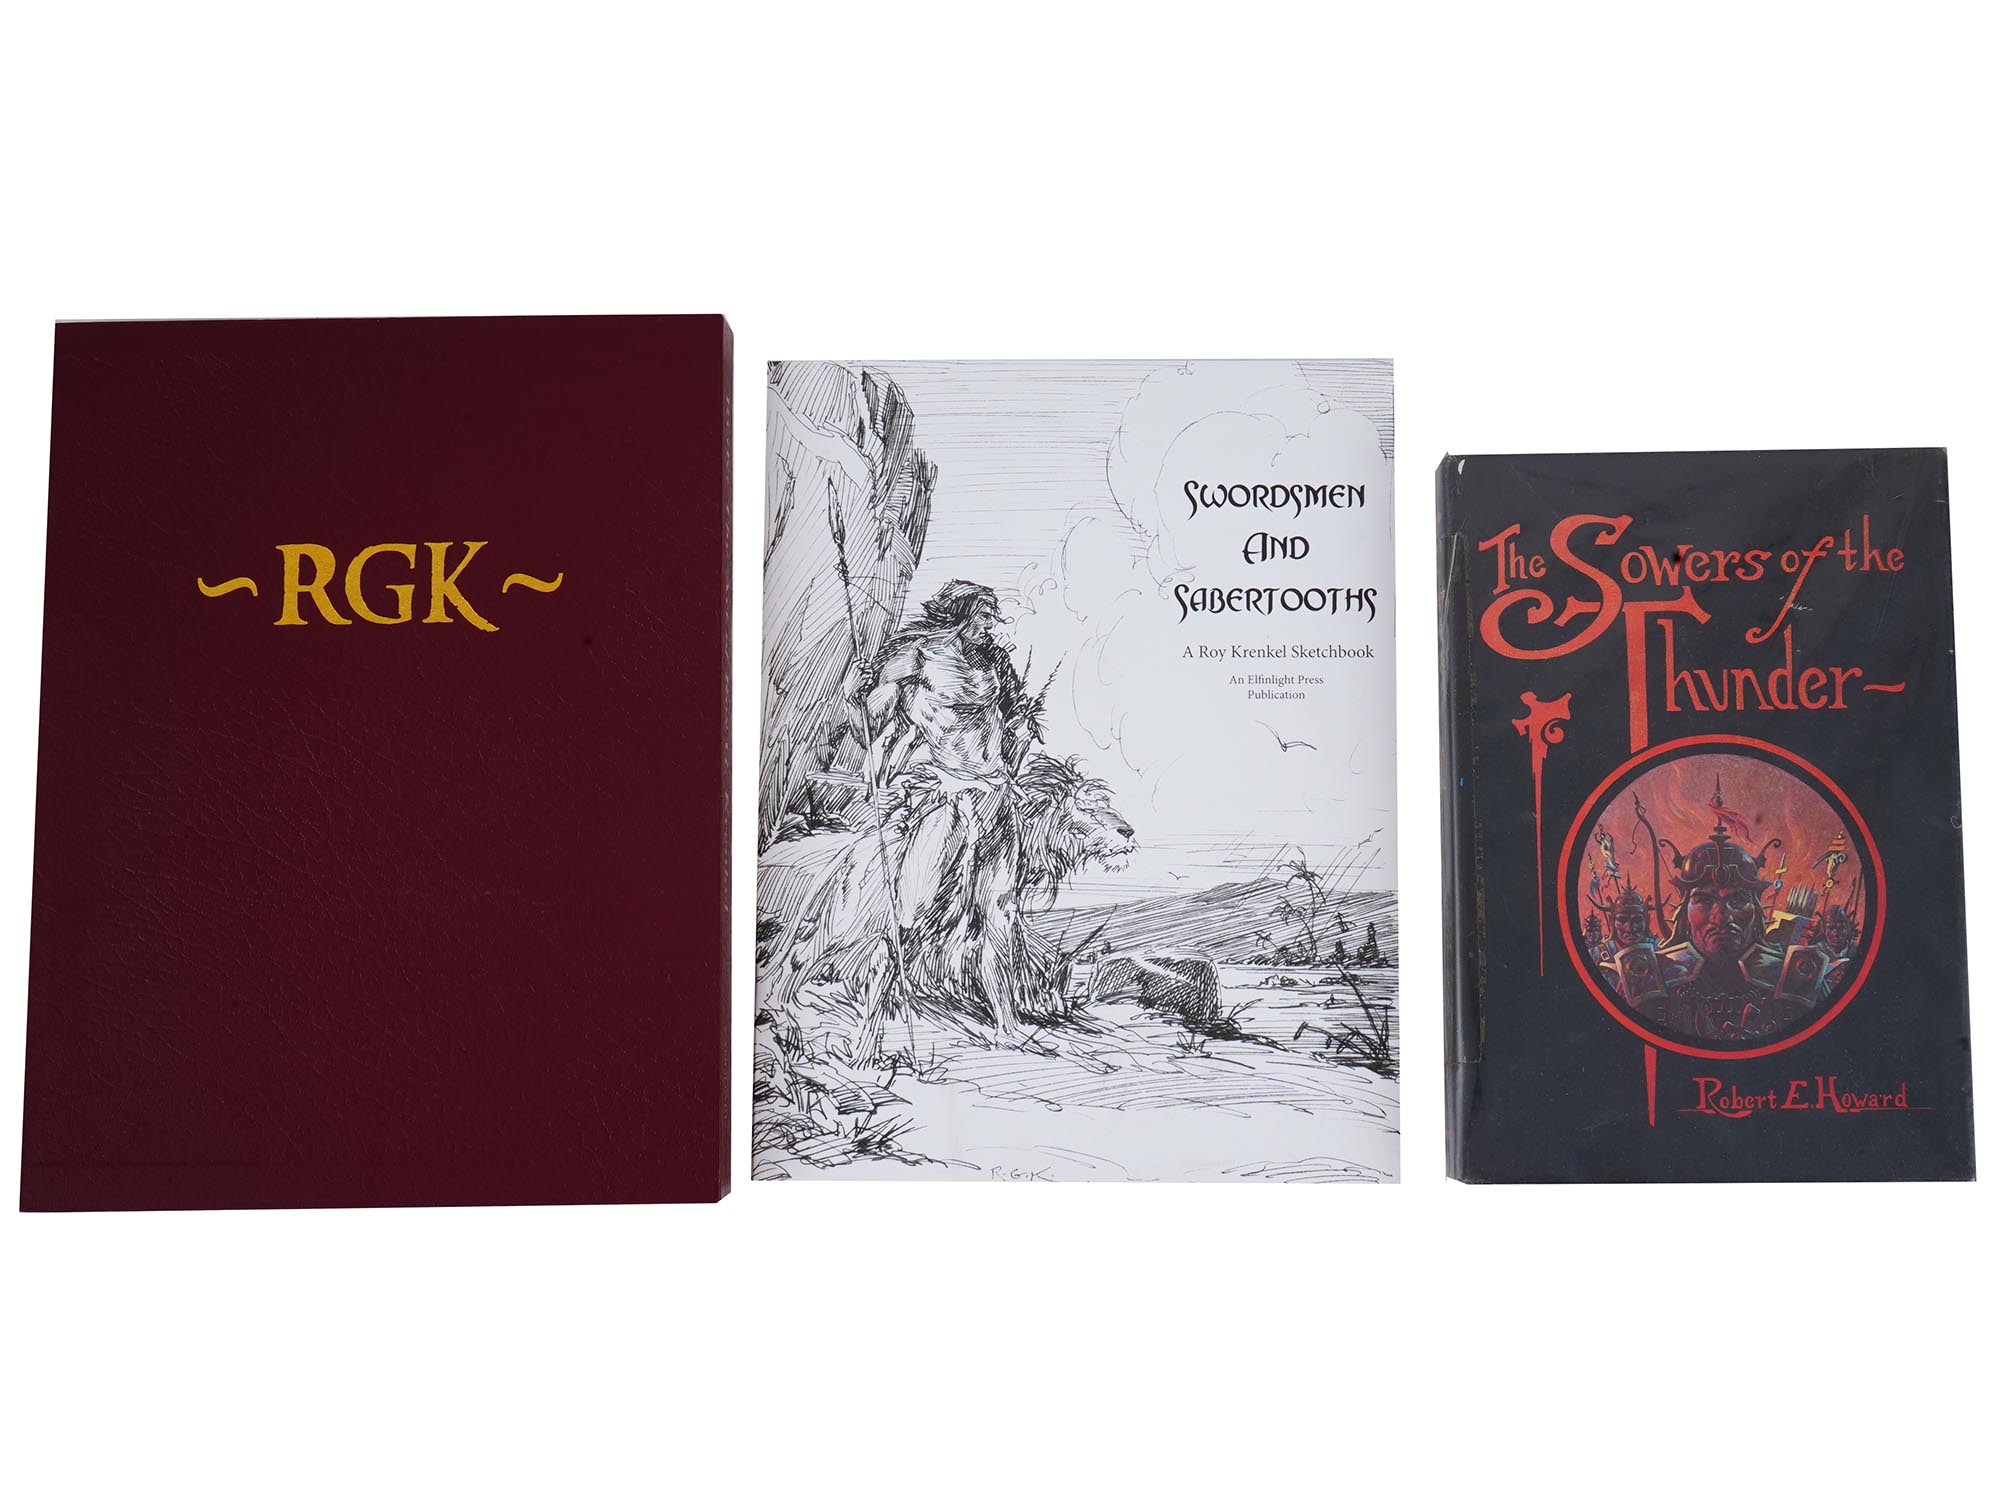 LIMITED EDITION BOOKS ILLUSTRATED BY ROY KRENKEL PIC-0